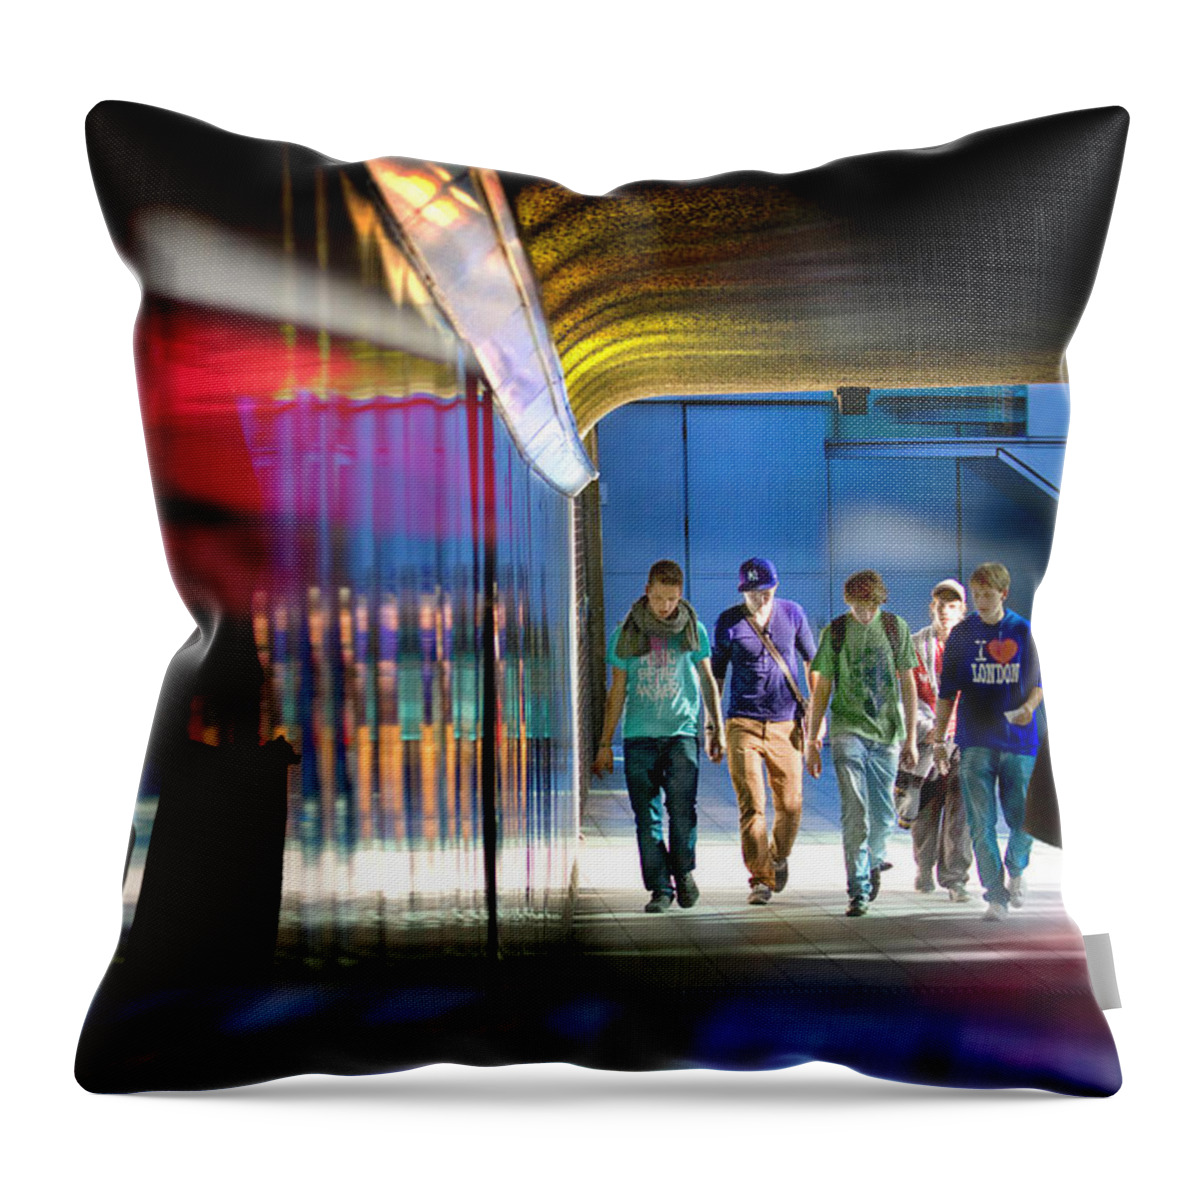 London Throw Pillow featuring the photograph Going Places by Richard Piper